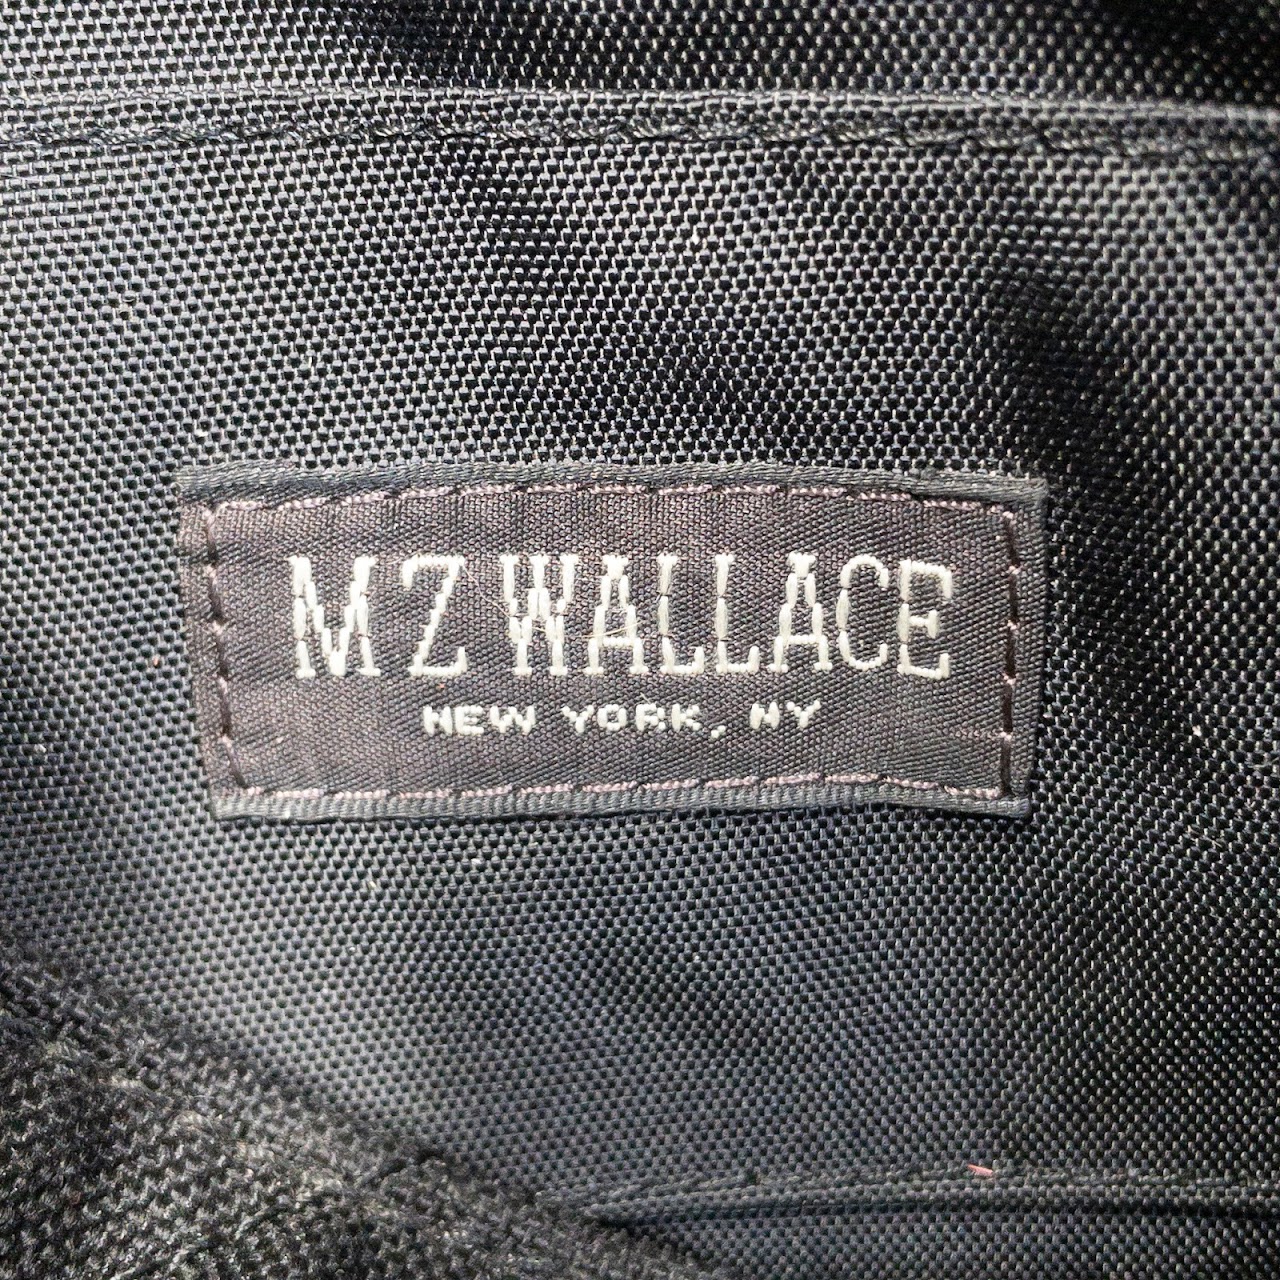 MZ Wallace Vintage Quilted Tote